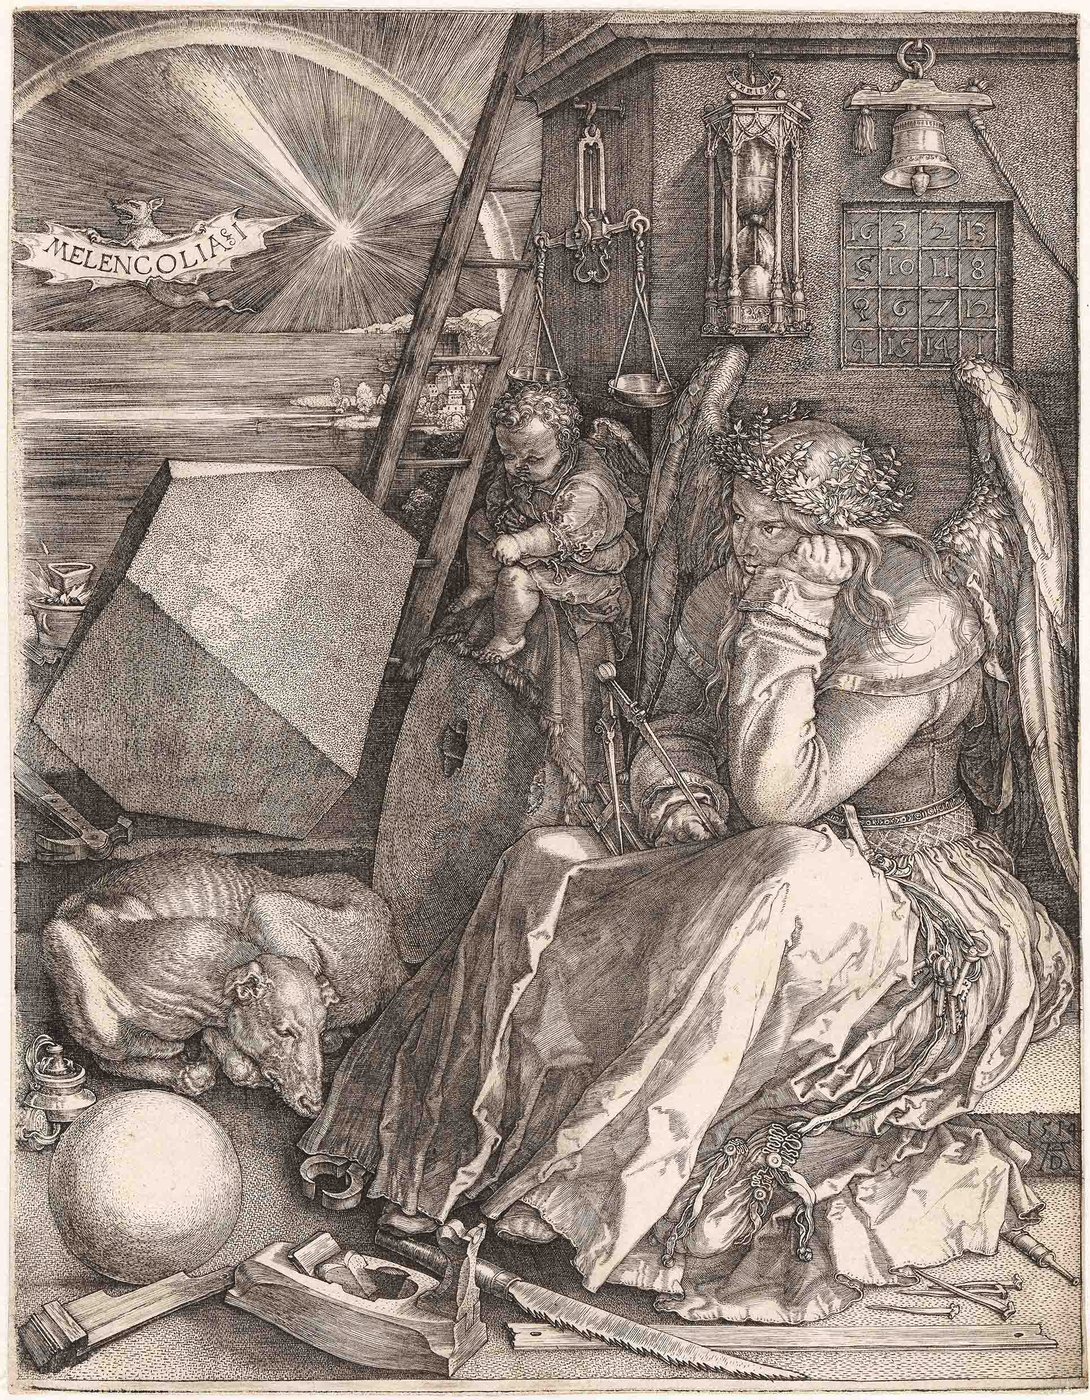 In the right half of the picture sits a woman with angel wings holding a compass and a book. Next to her, a boyish putto sits on a millstone in front of a house wall crowned with a cornice and hung with a pair of scales, an hourglass, a bell and a square of numbers. A dog and various tools lie on the ground in front of a tetrahedron. In the background of the picture, the sea with the coast is depicted on the left. The dark sky above is illuminated by a comet.